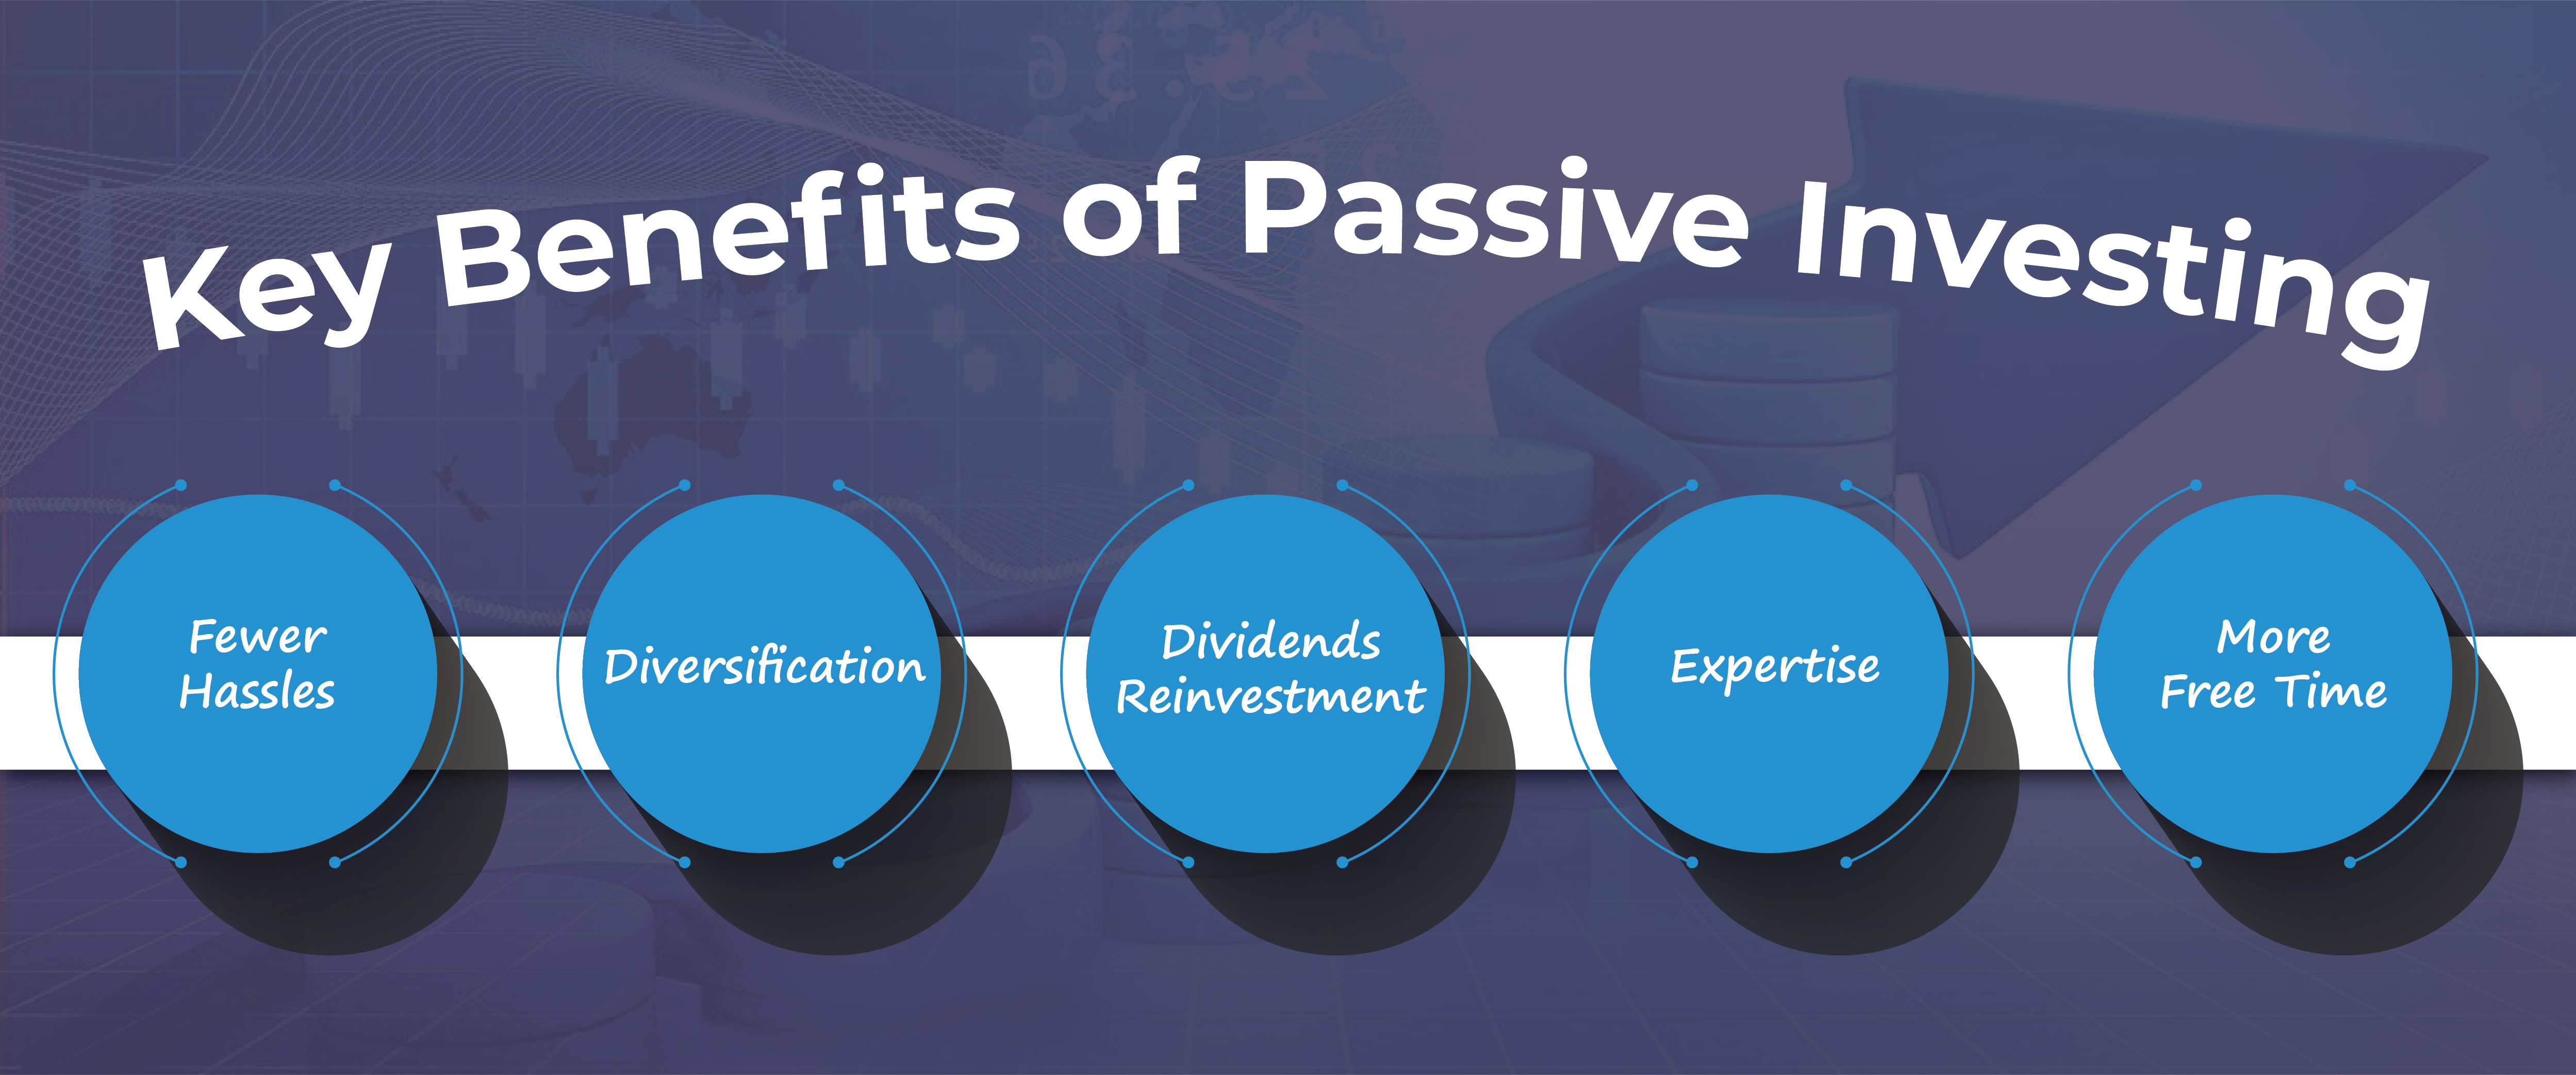 The Key Benefits of Passive Investing